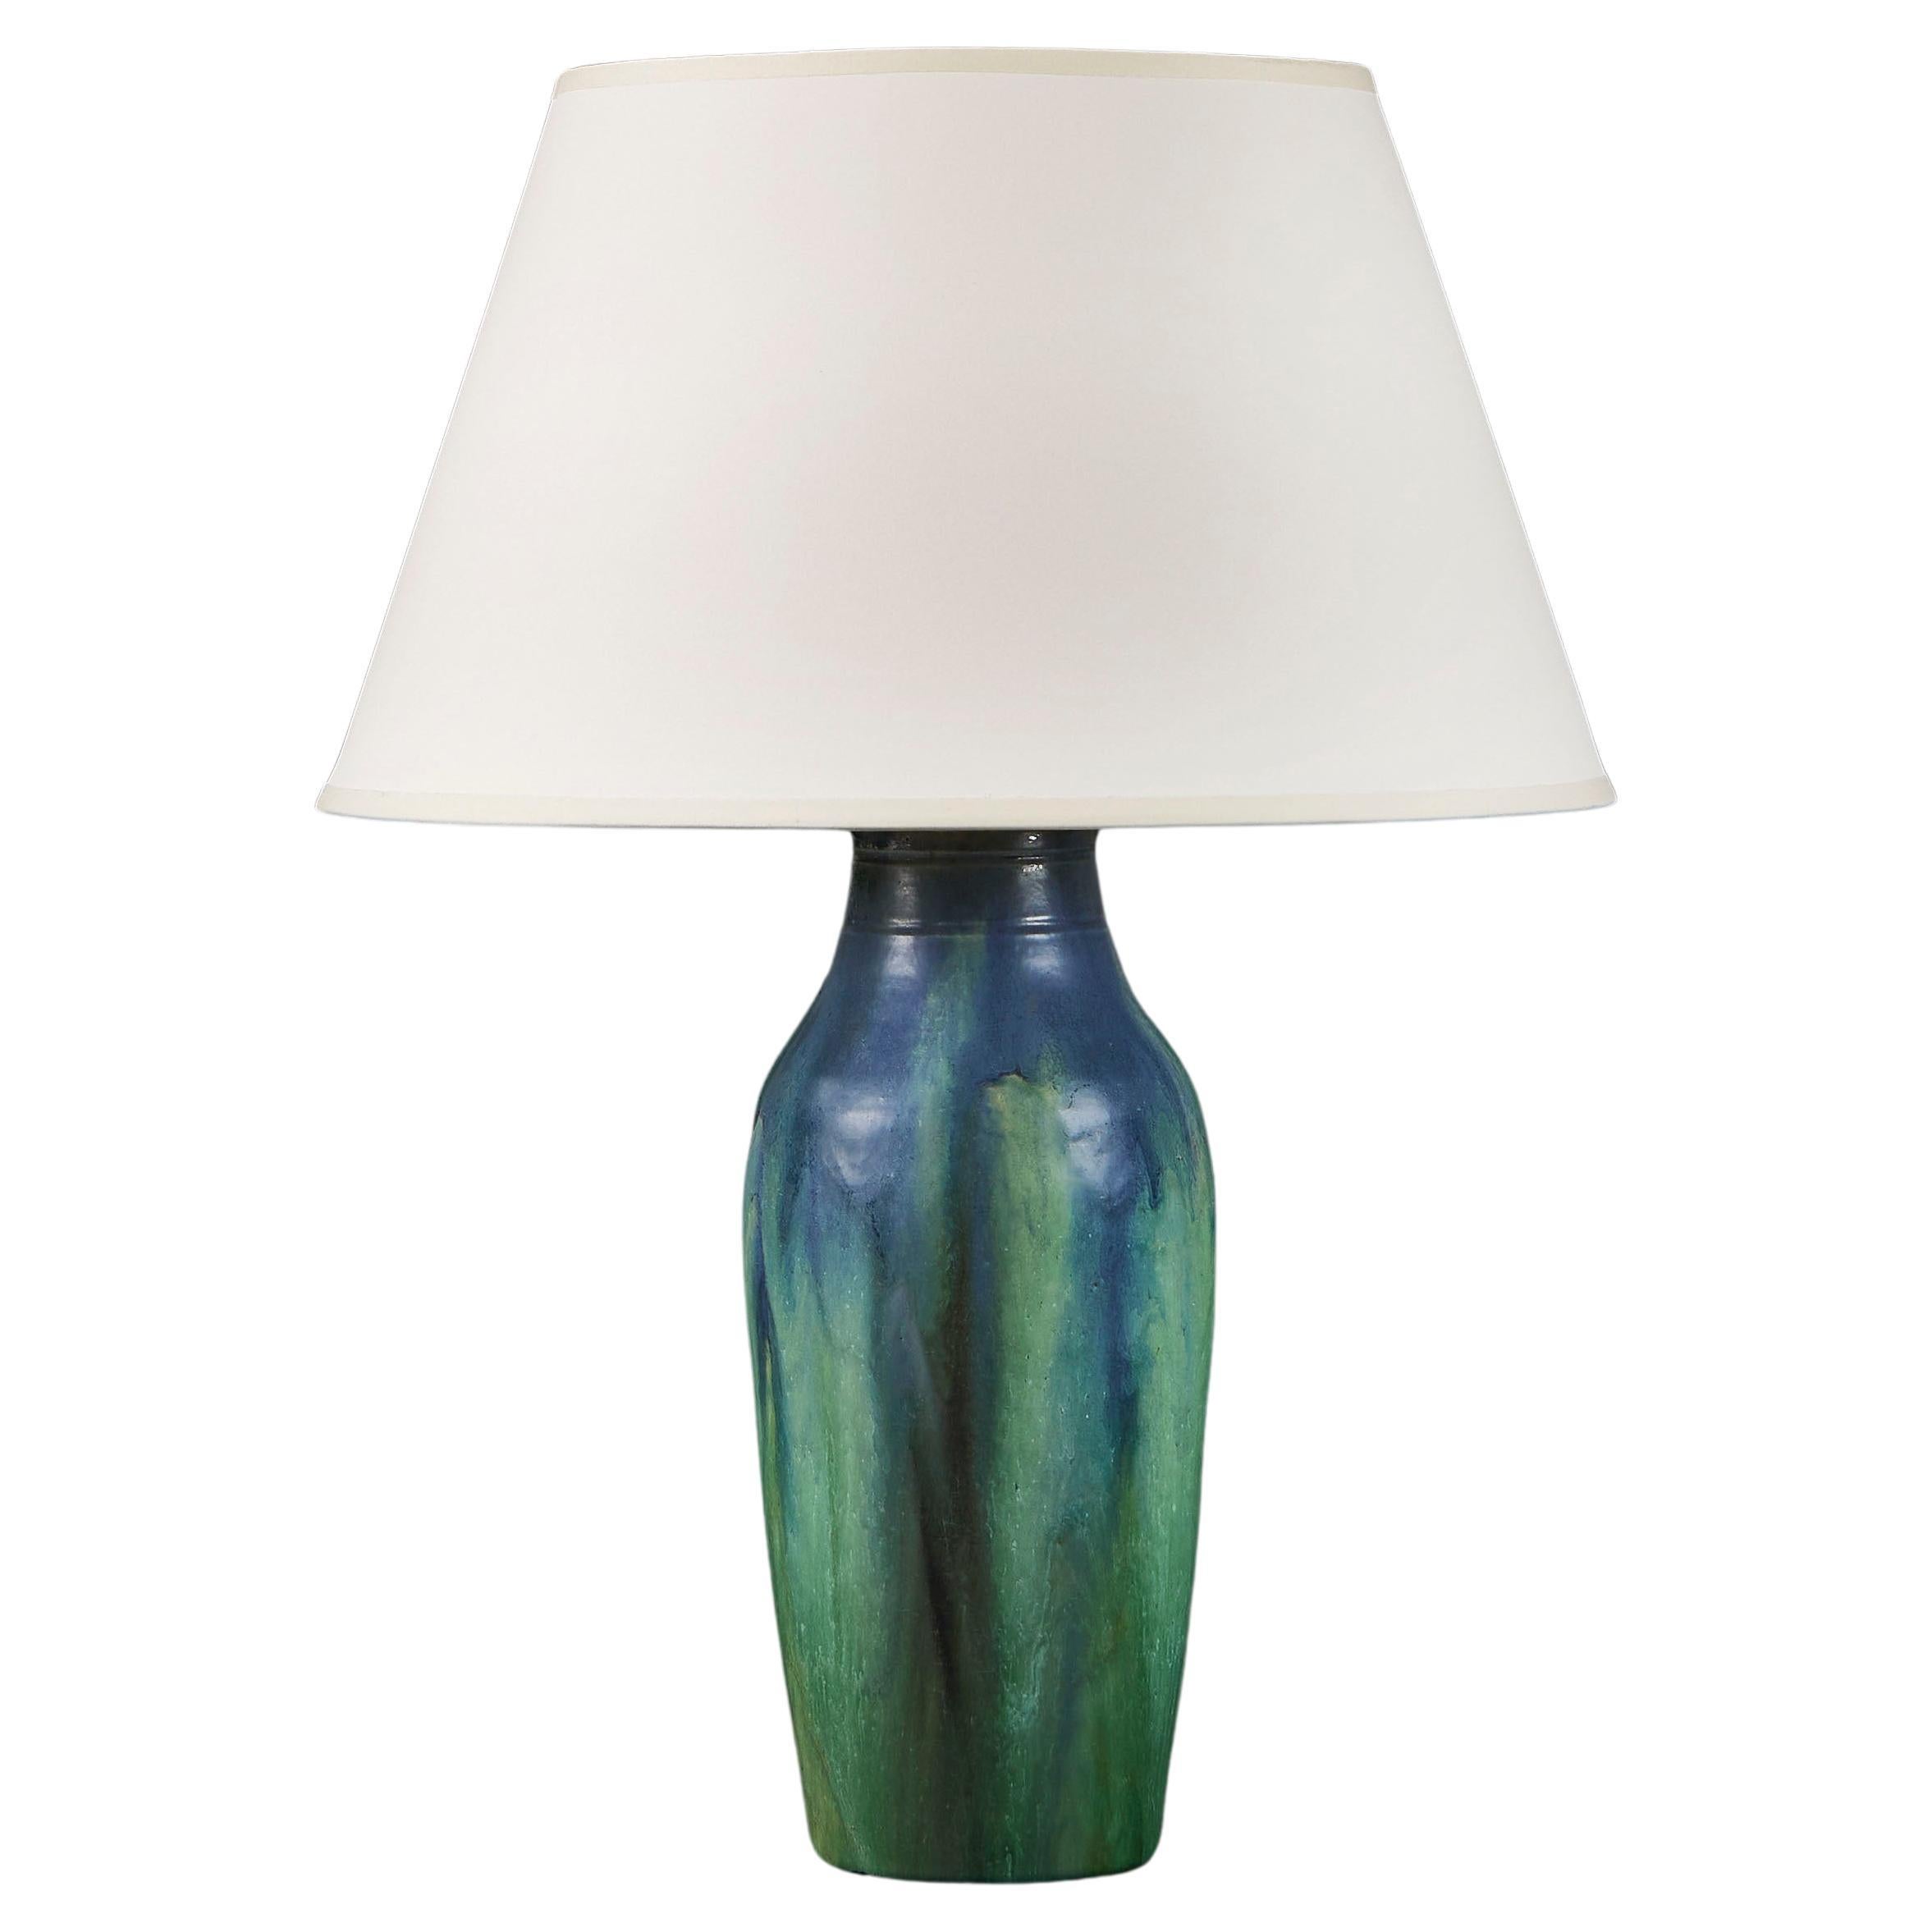 A blue and green drip glaze pottery table lamp